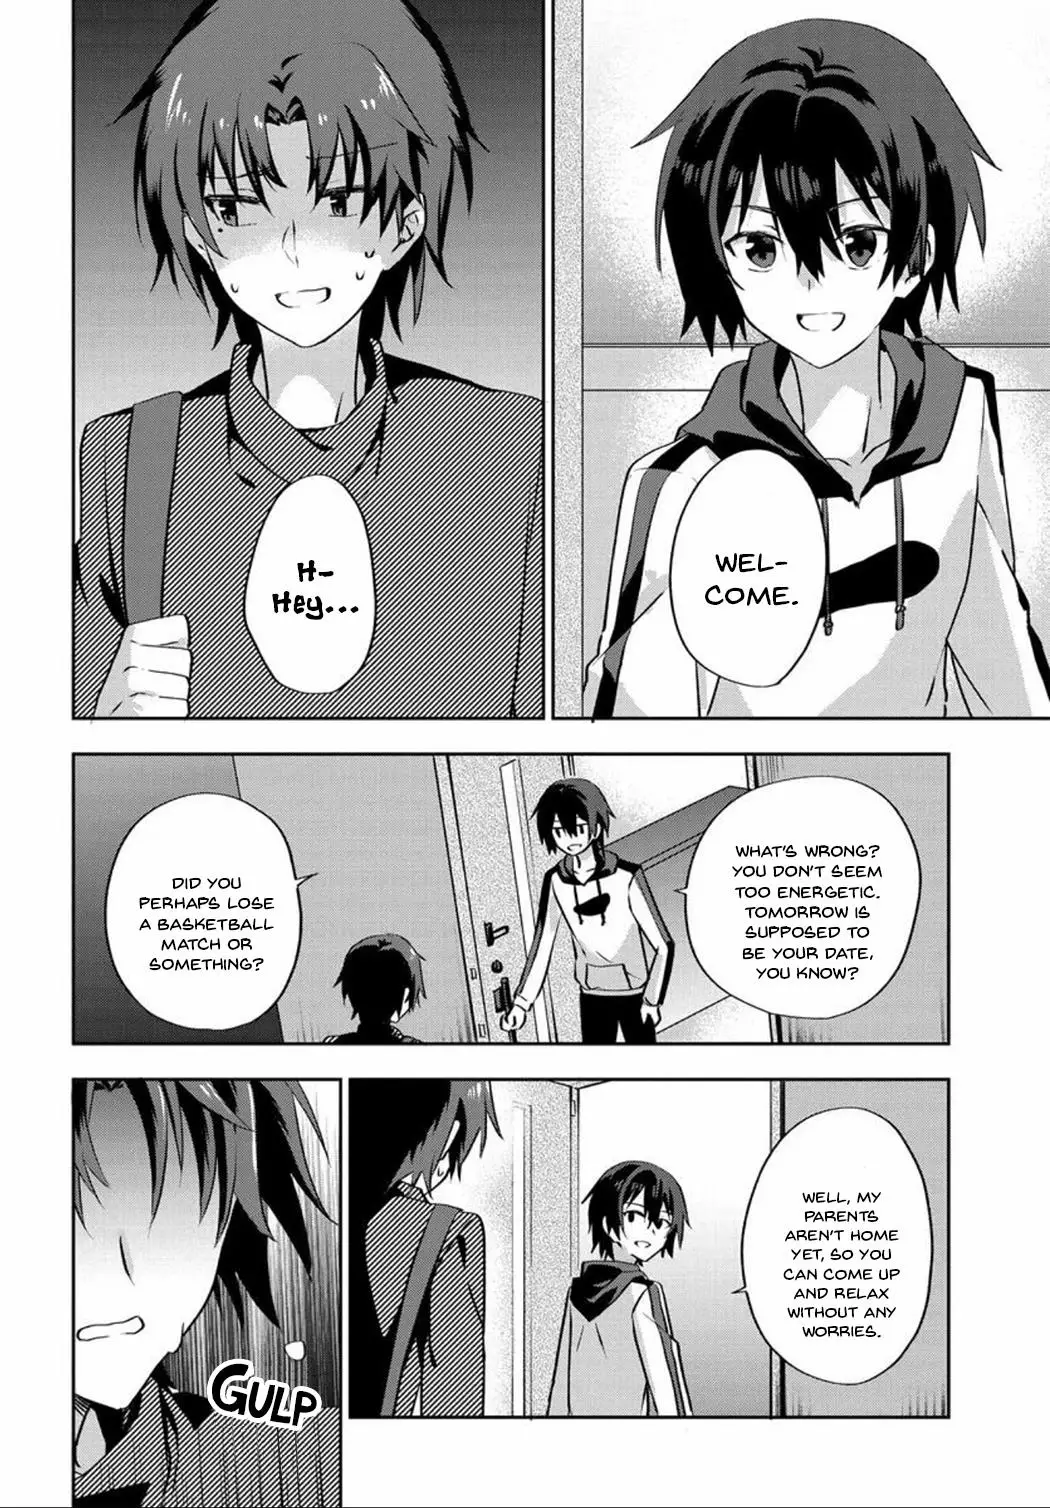 Since I’Ve Entered The World Of Romantic Comedy Manga, I’Ll Do My Best To Make The Losing Heroine Happy - 5.2 page 6-79858679